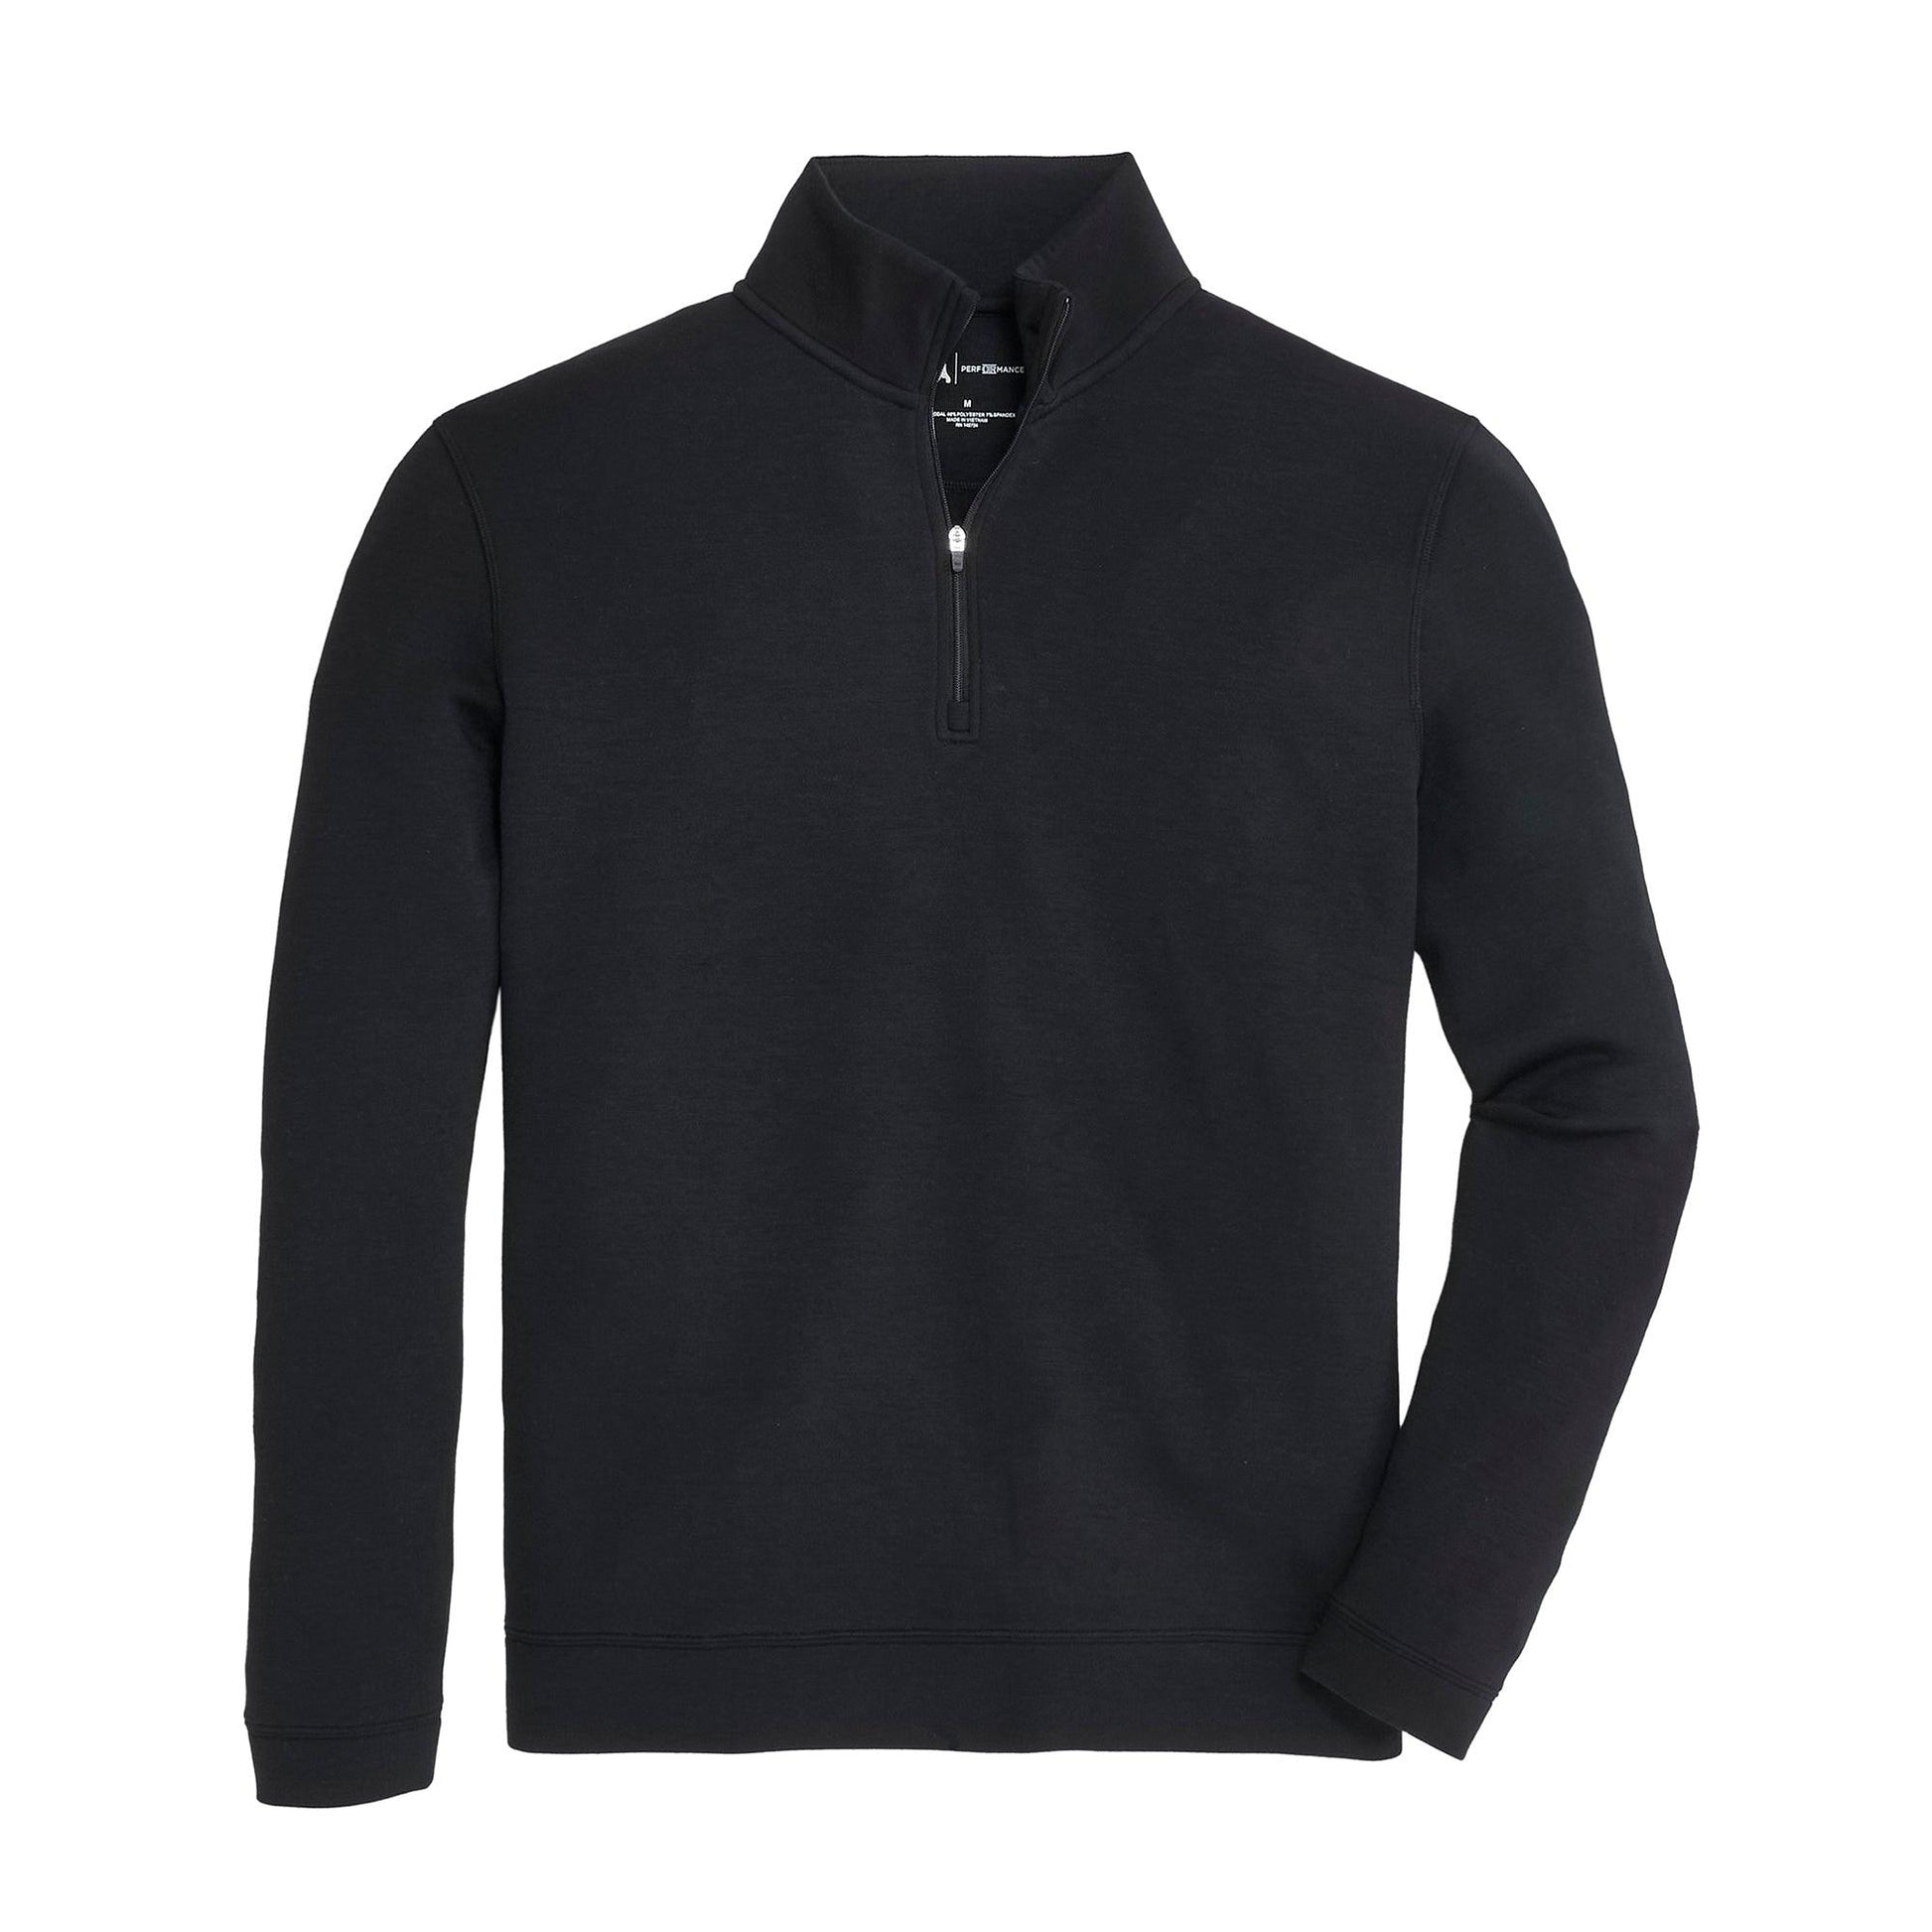 Yeager Performance Pullover - Onward Reserve